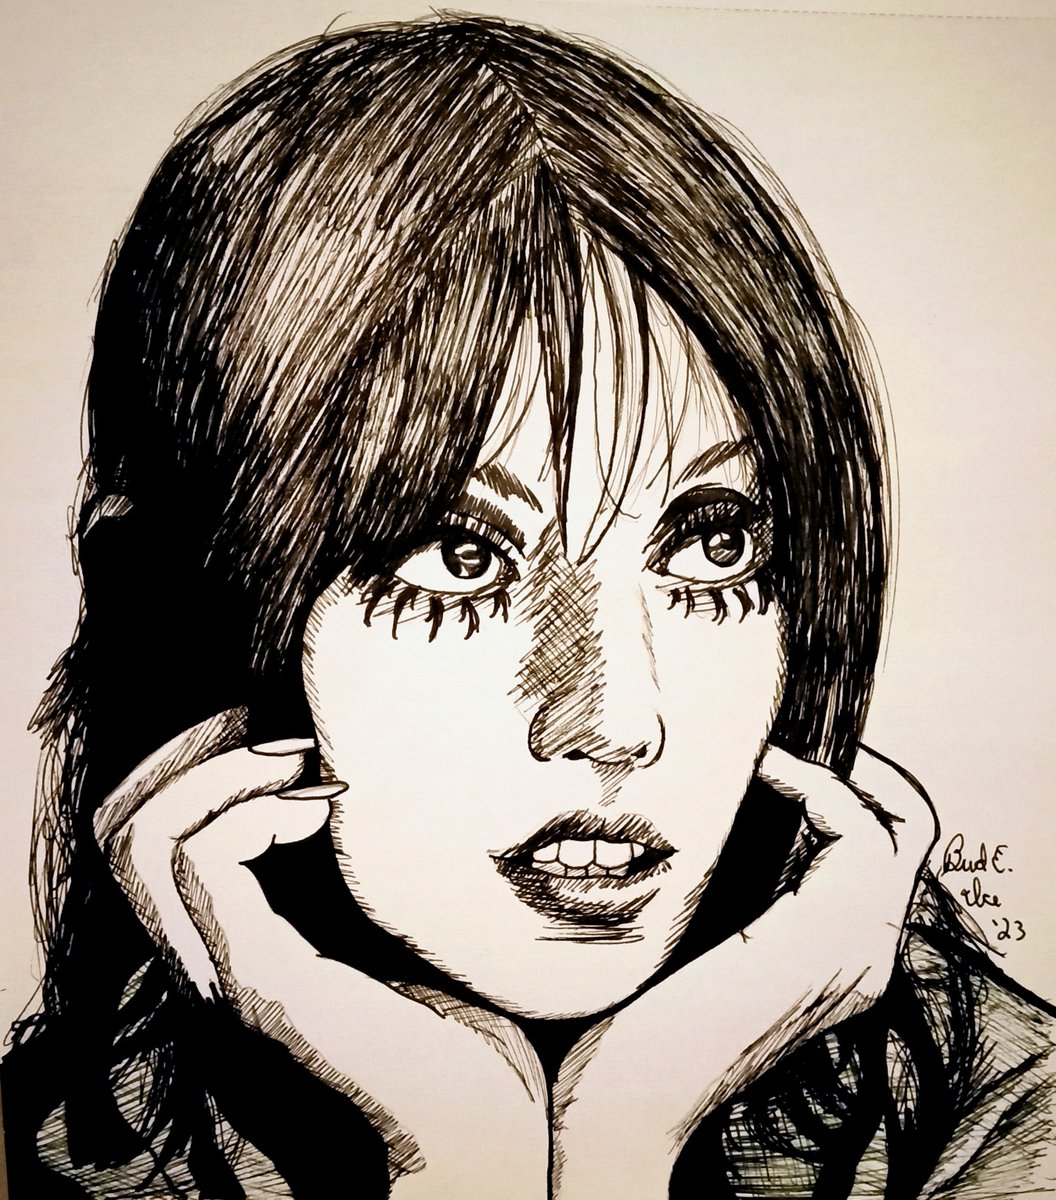 My drawing of a young Shelley Duvall. 
#art #drawing #sketch #artwork #shelleyduvall #theshining #horror